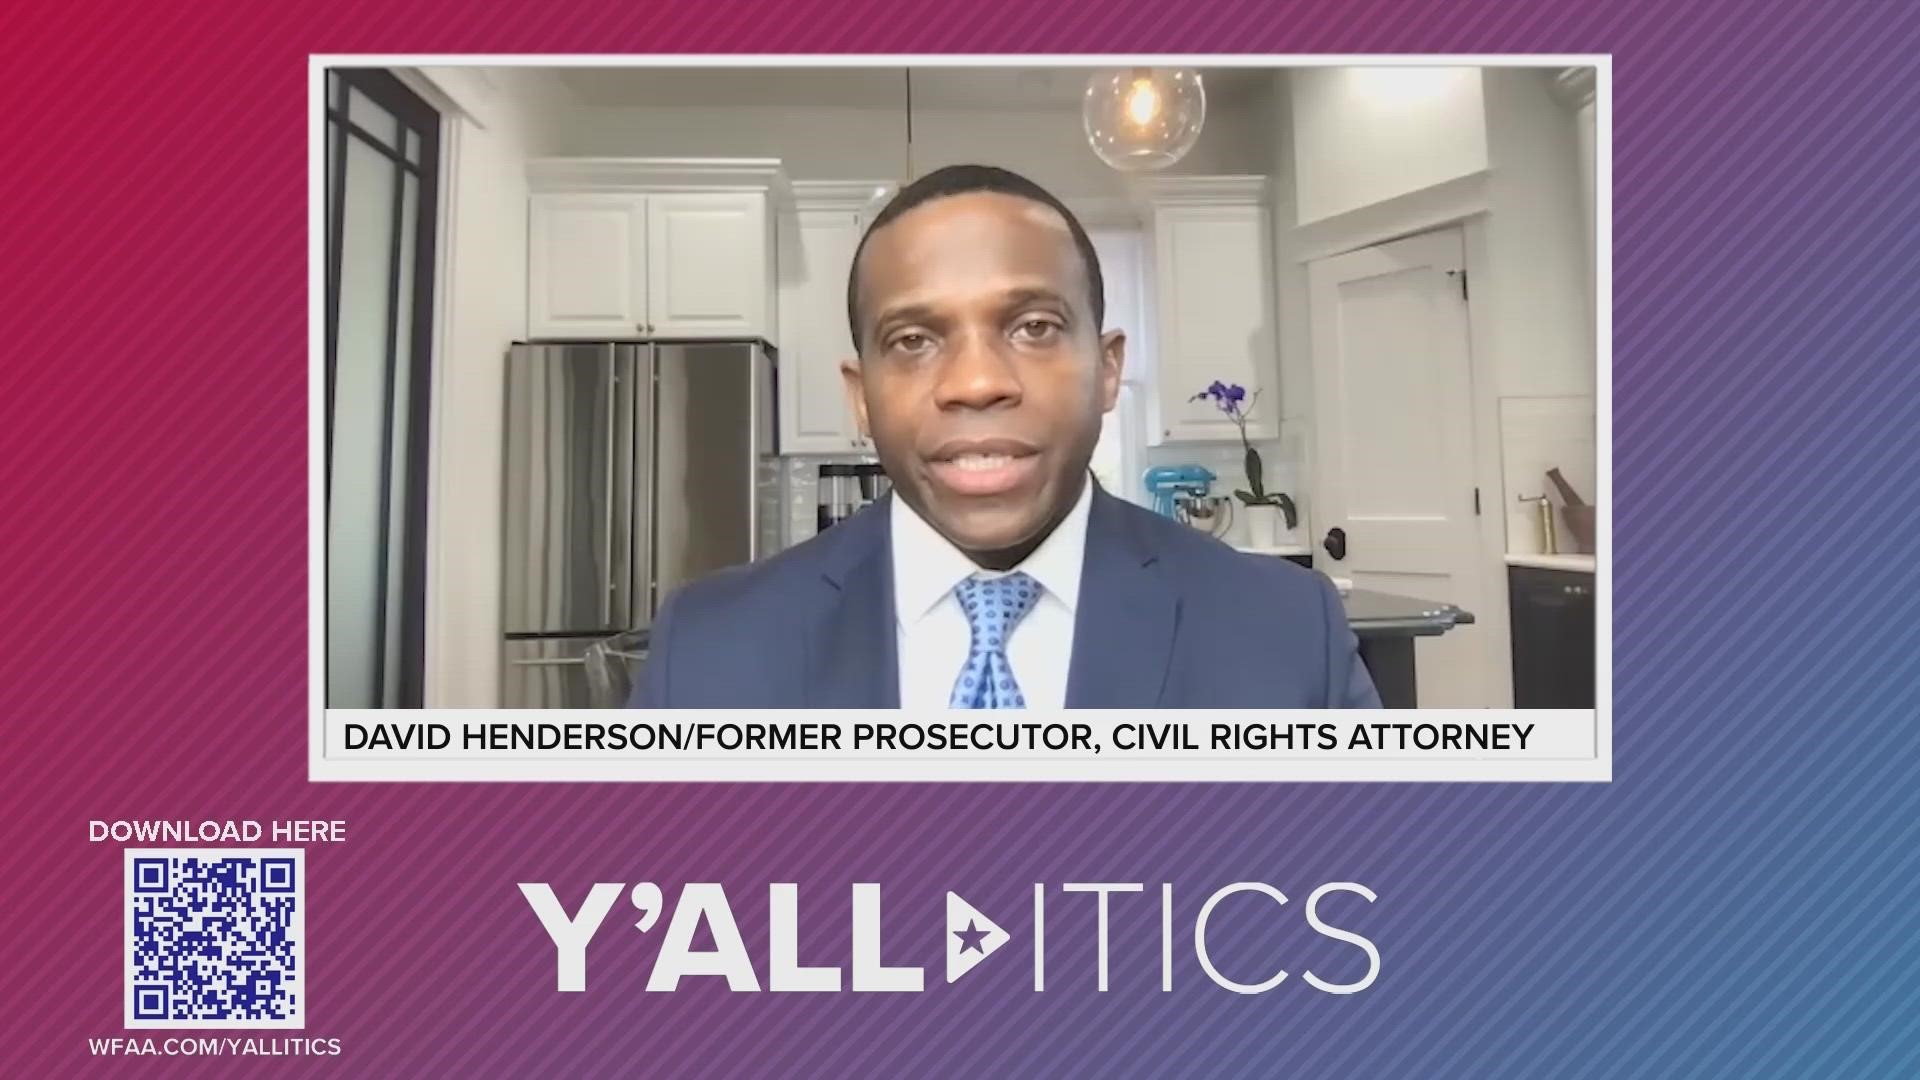 David Henderson, a former prosecutor and civil rights attorney, joined Y'all-itics this week.